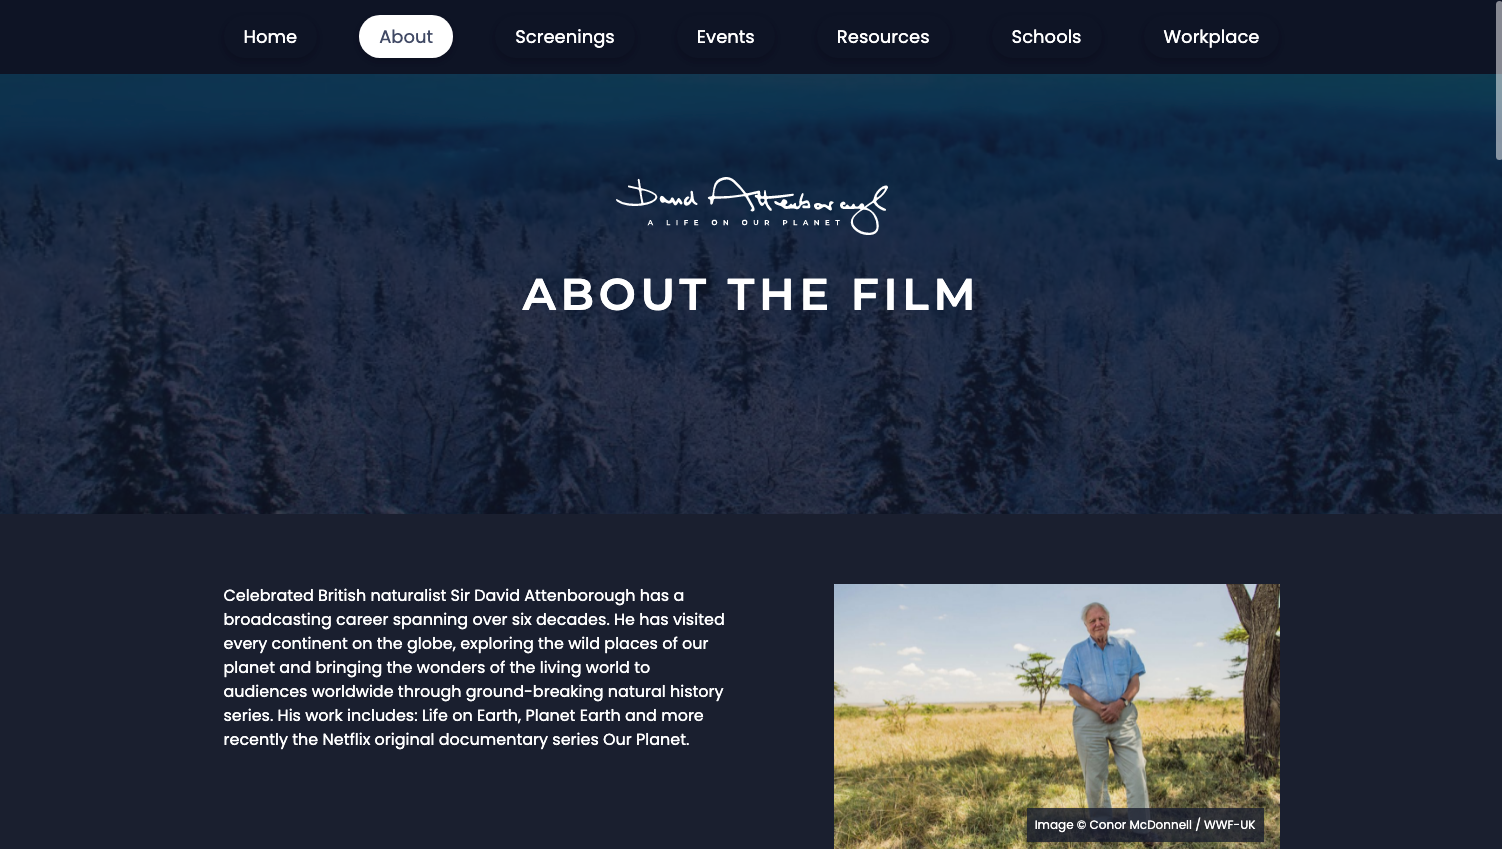 Website layout for an about section featuring David Attenborough